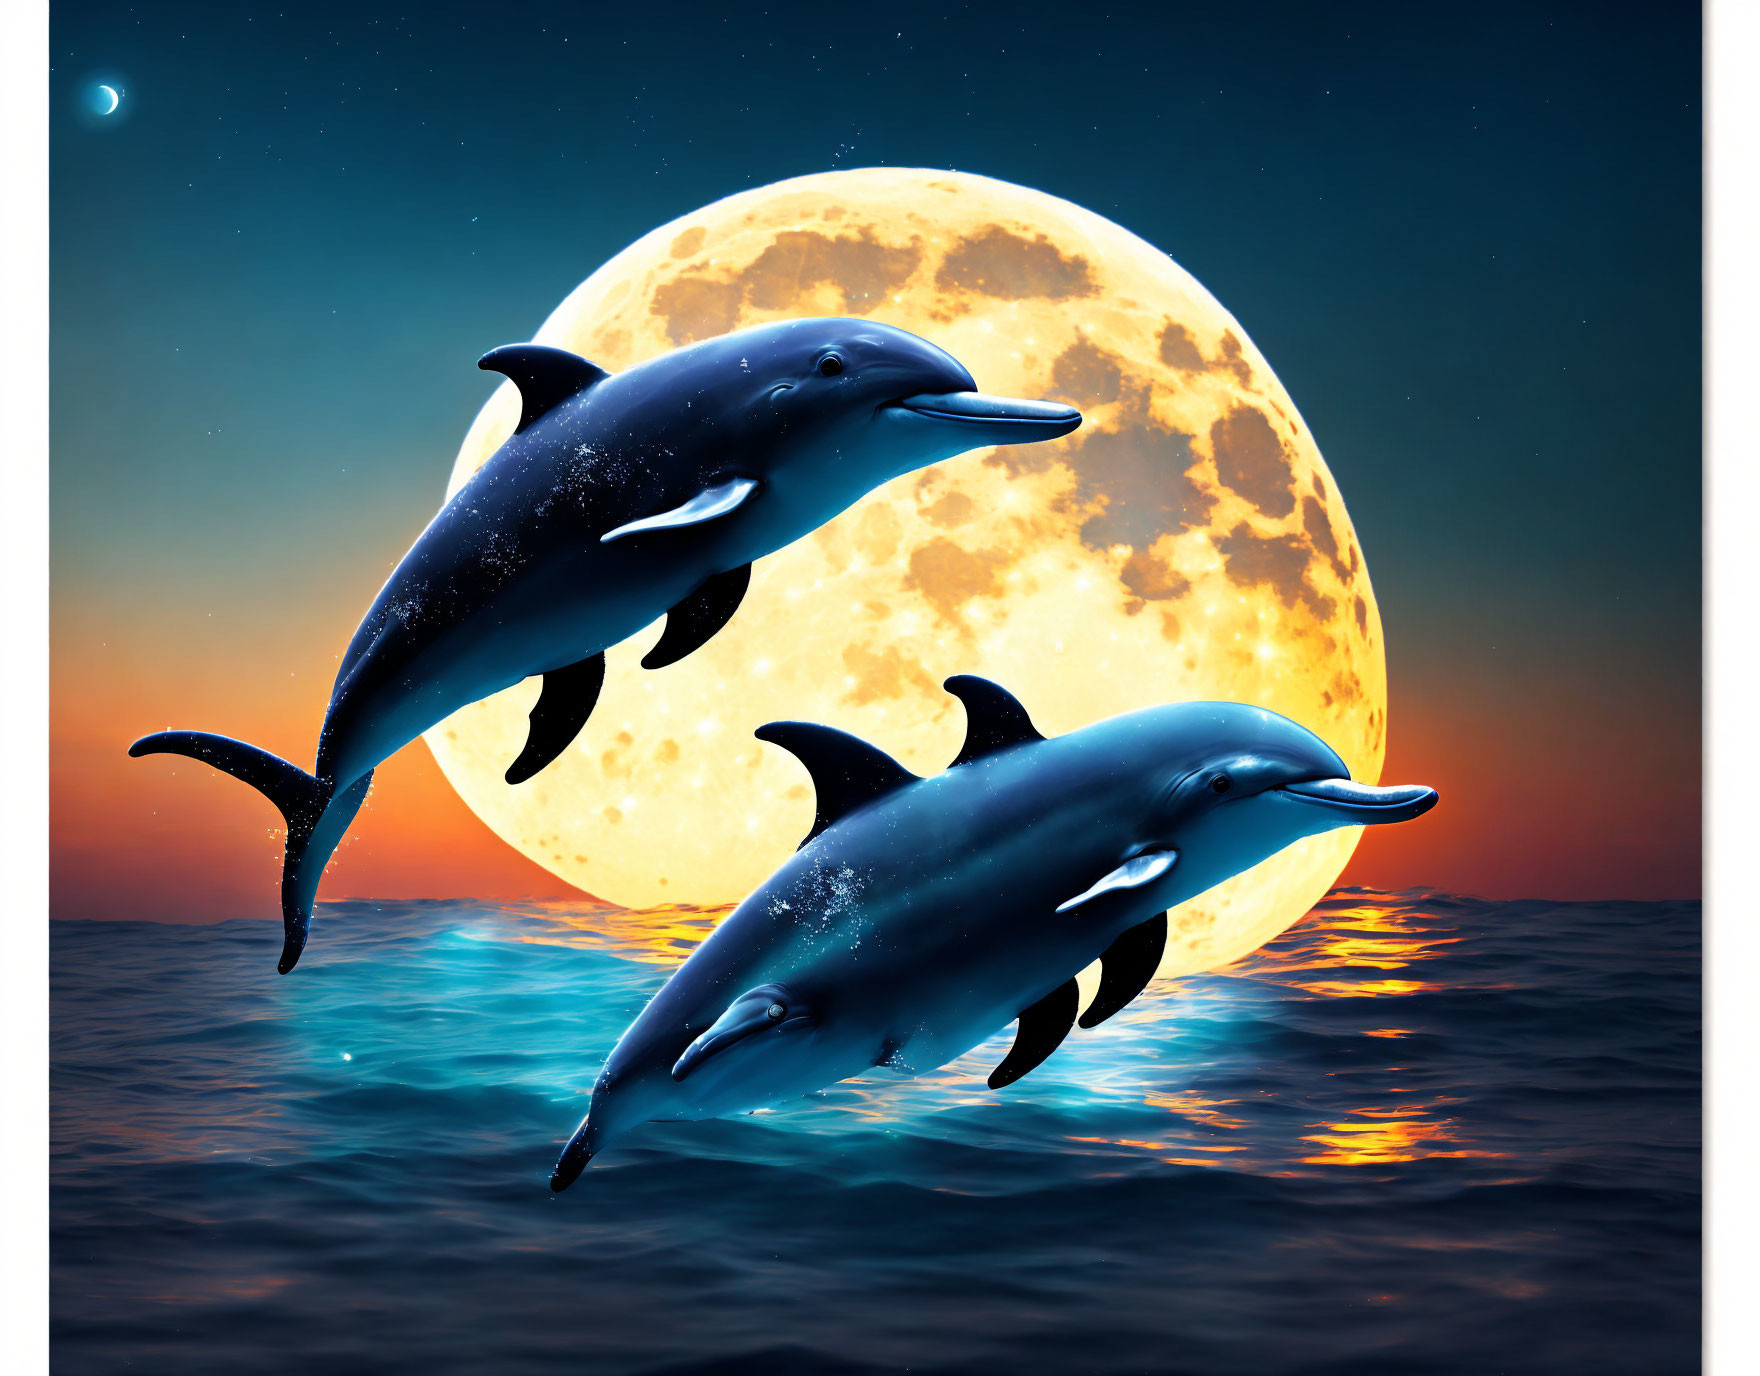 Dolphins leaping under full moon in twilight sky